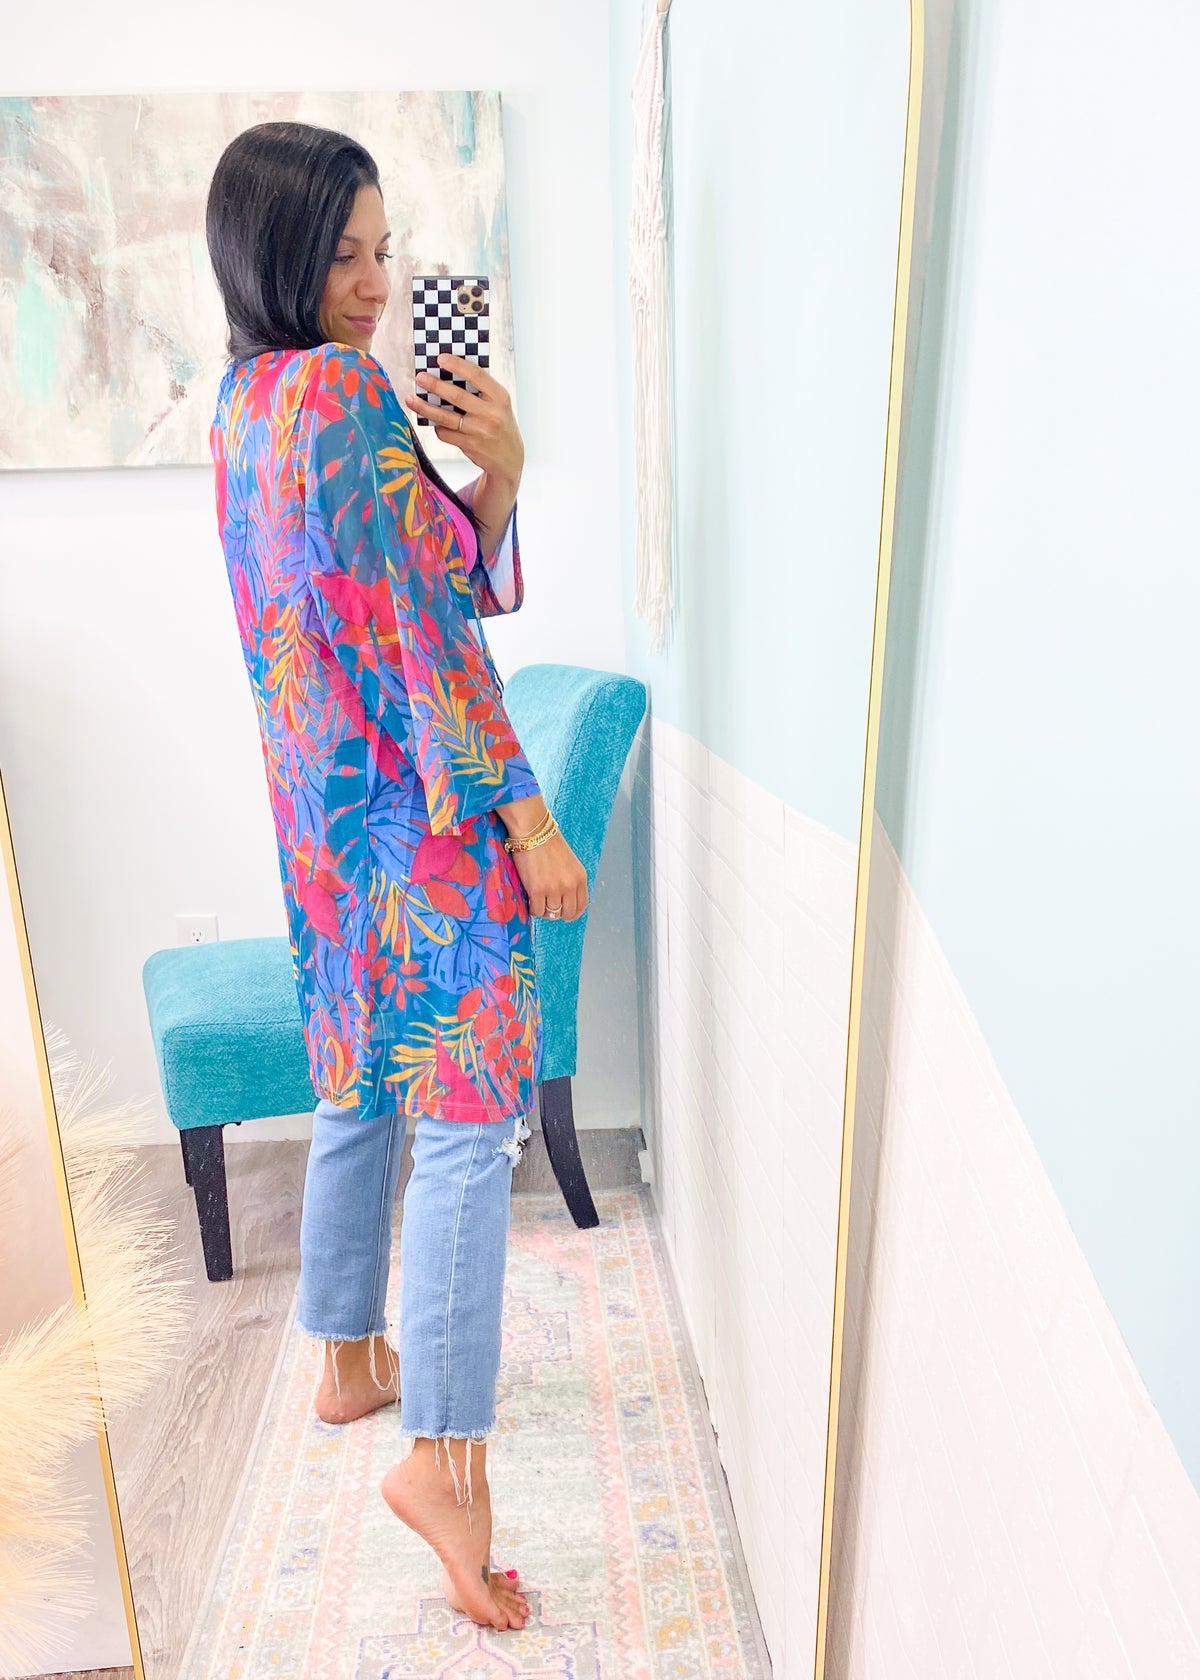 'Paradise Awaits' Turquoise Tropical Print Kimono-The gorgeous colors in this tropical print kimono will turn heads! Pops of pink &amp; orange on a turquoise base is beach &amp; Summer days ready! Wear as part of your outfit or as a bathing suit coverup-Cali Moon Boutique, Plainville Connecticut